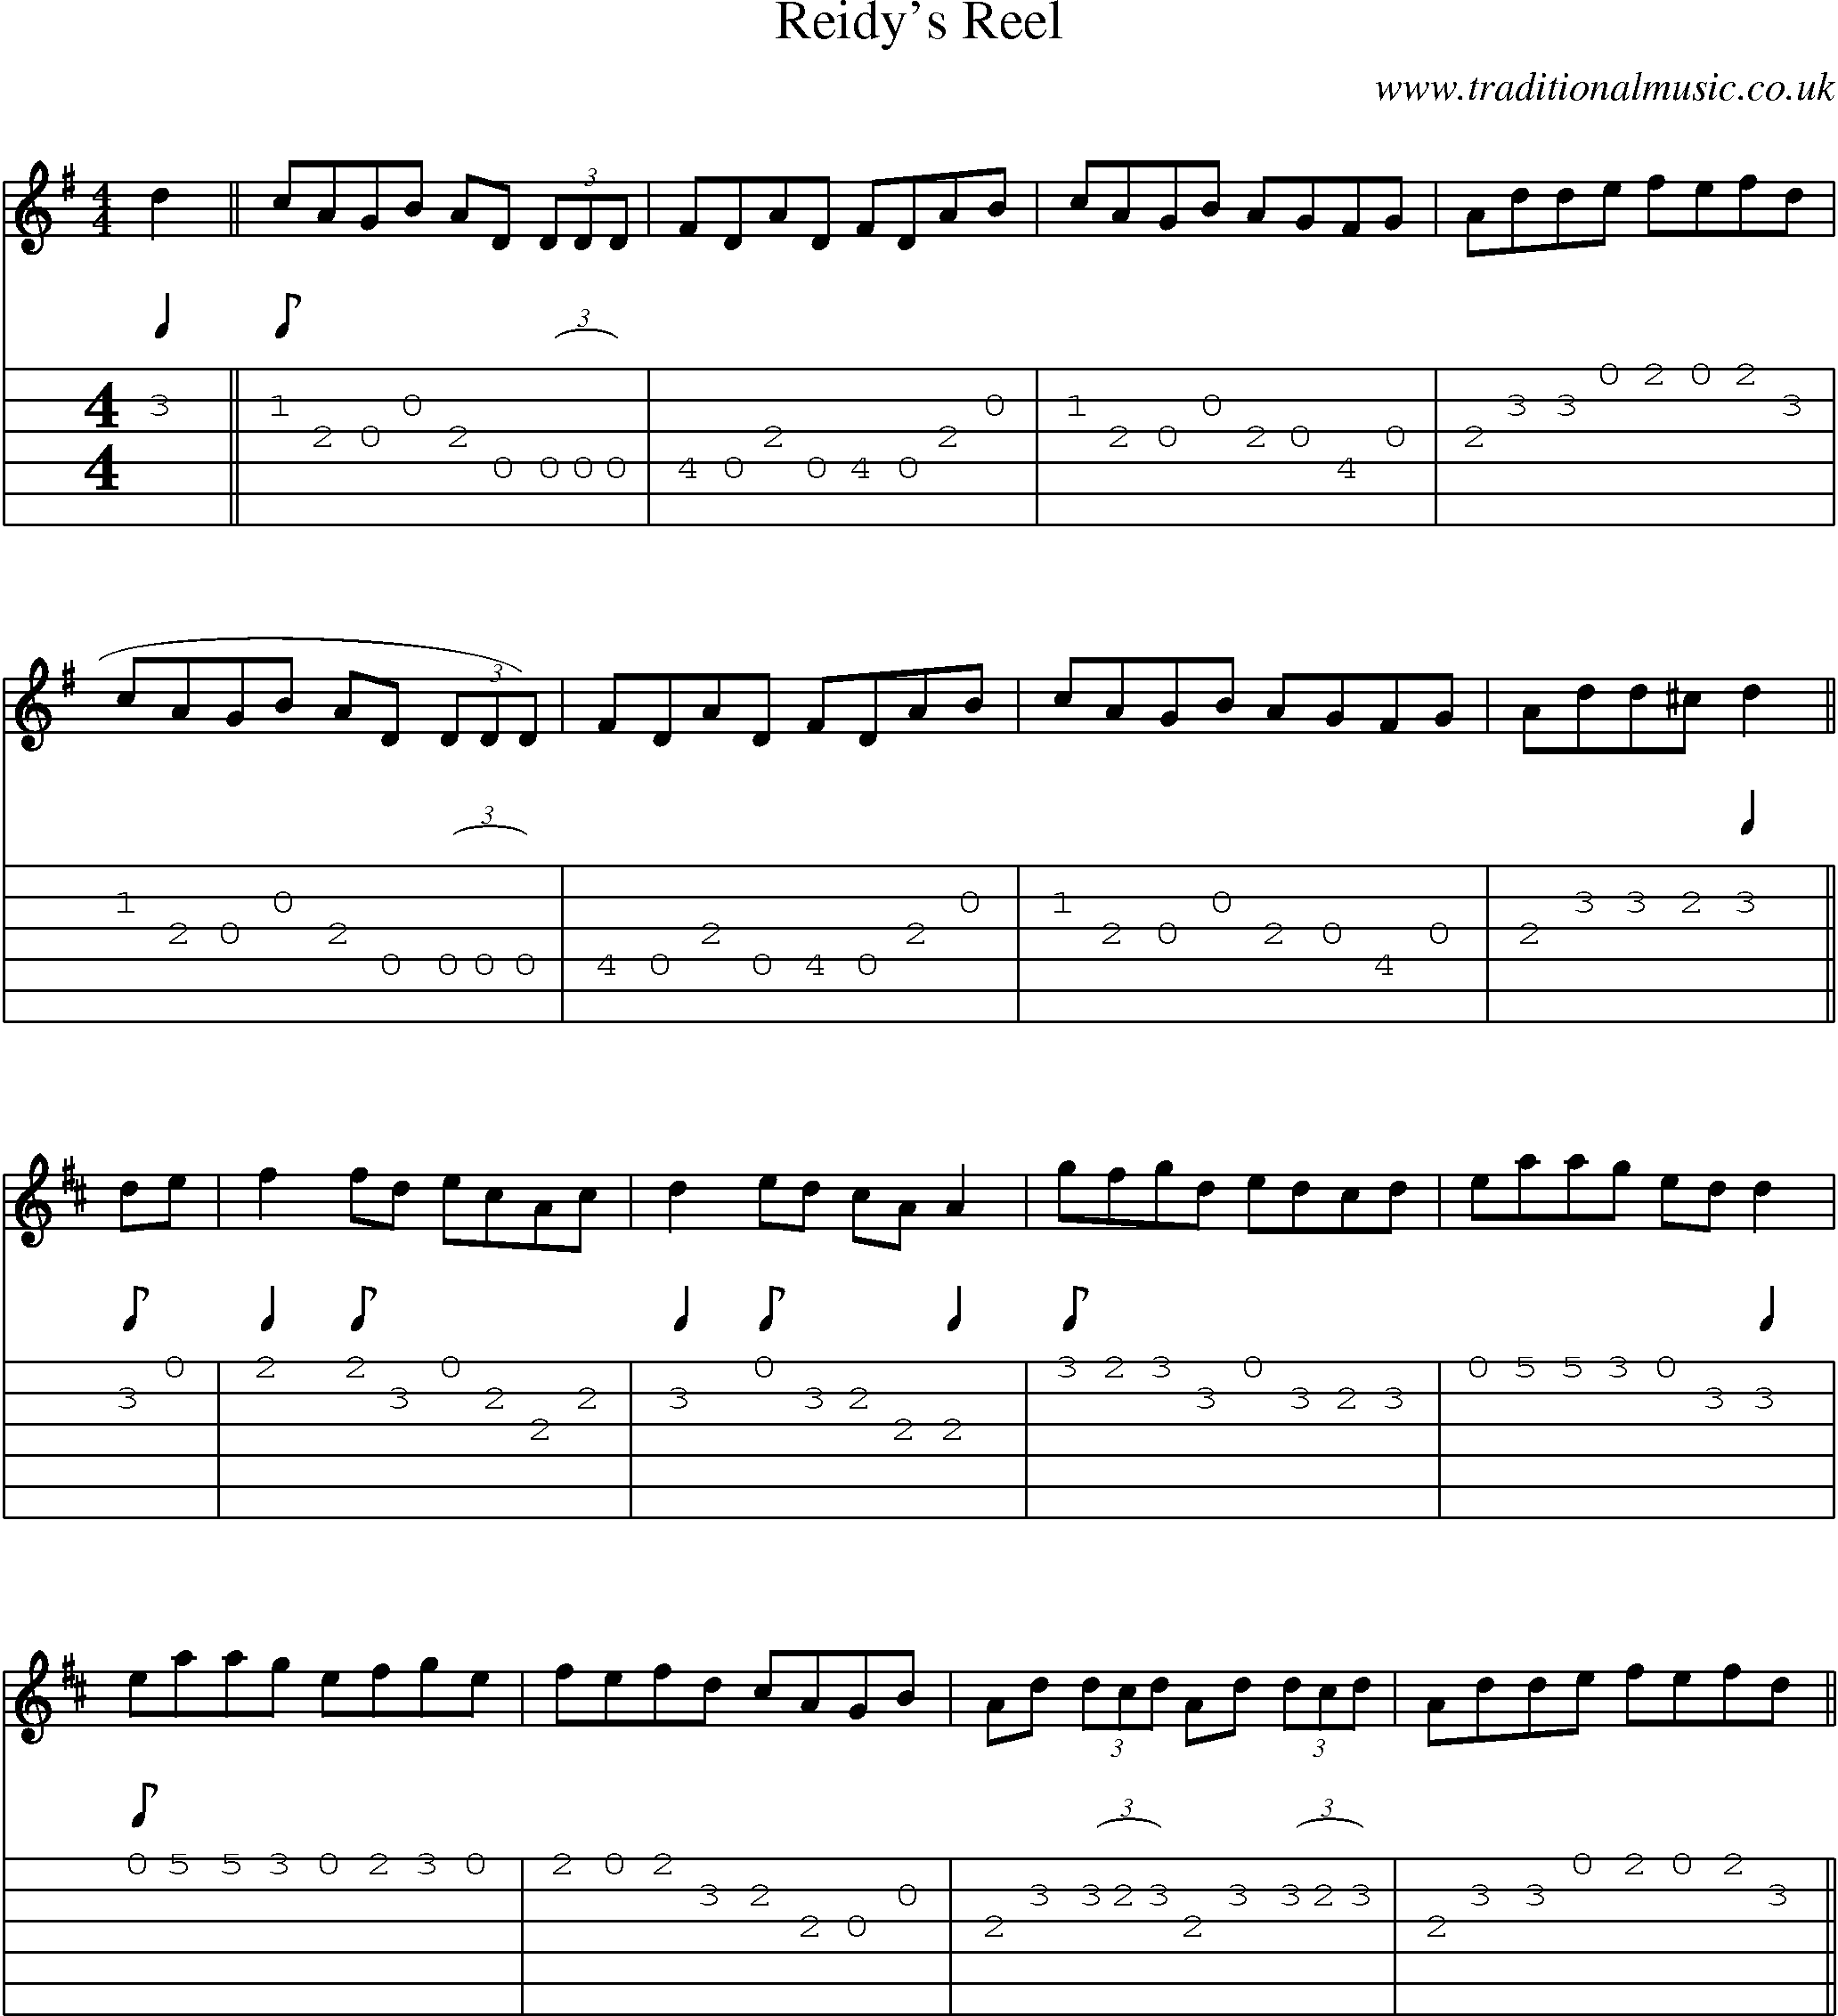 Music Score and Guitar Tabs for Reidys Reel